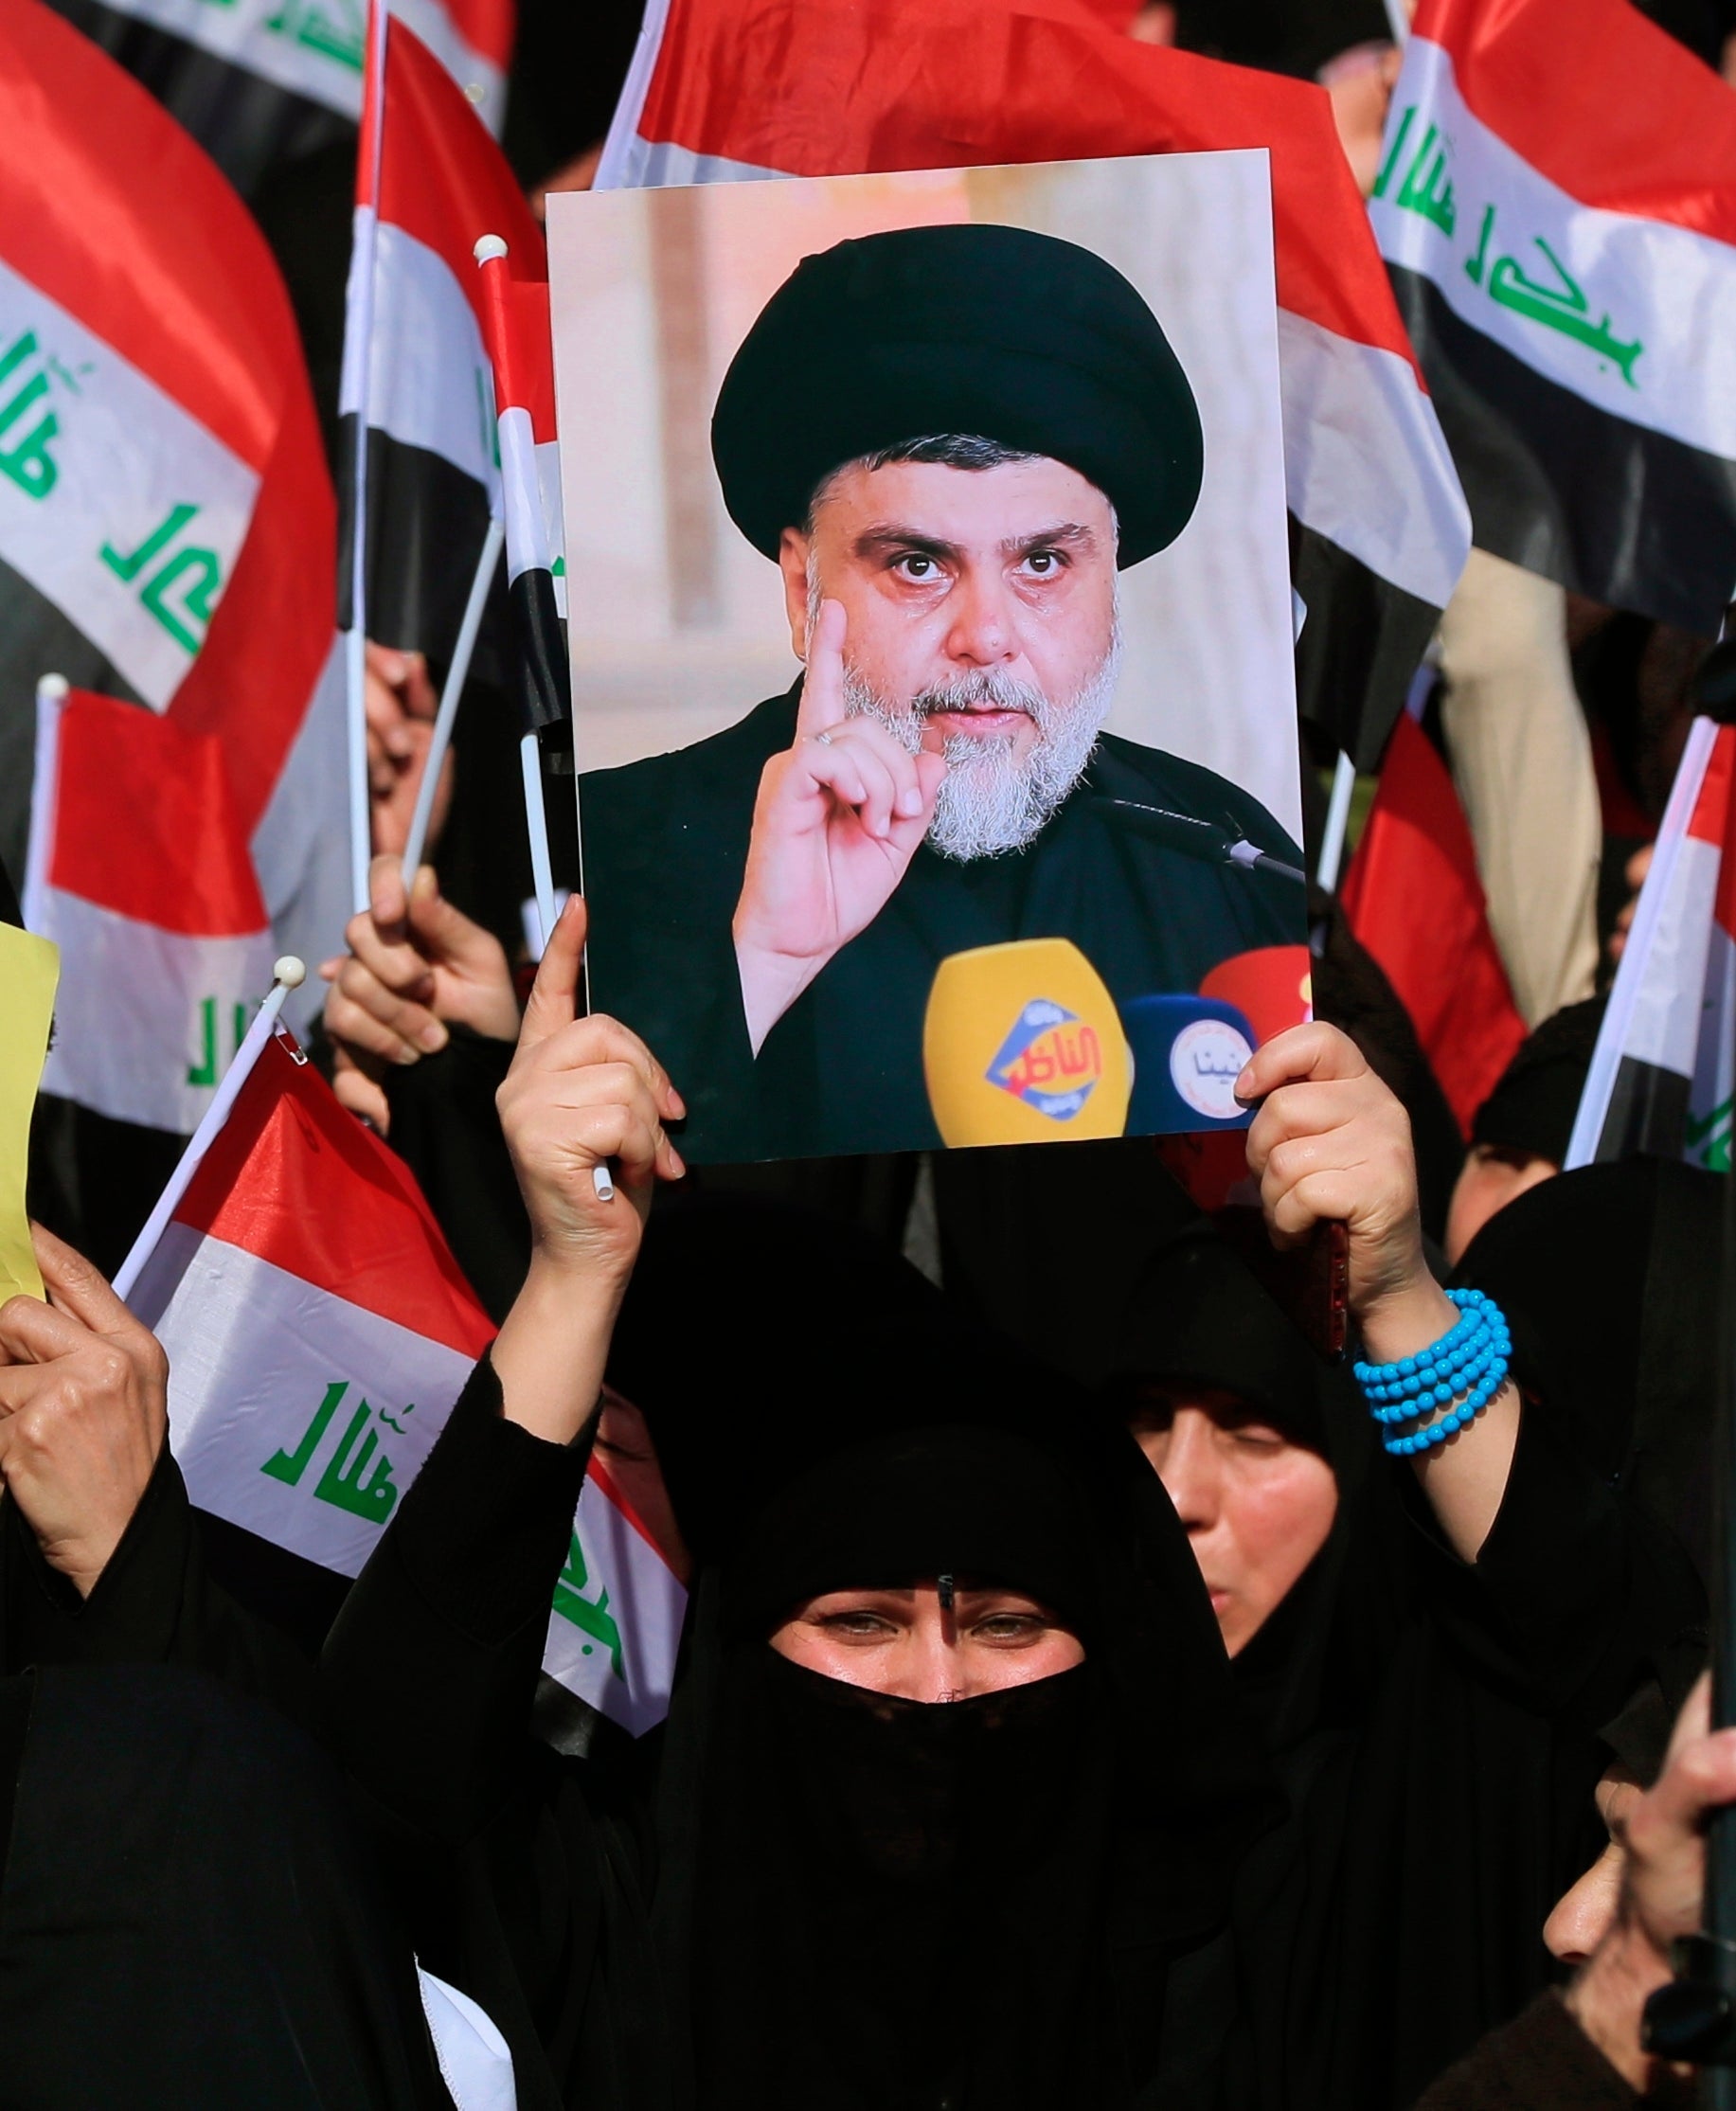 The cleric’s call for gender segregation at anti-government rallies prompted hundreds of Iraqi women to take to the streets last month, both to challenge and defend him